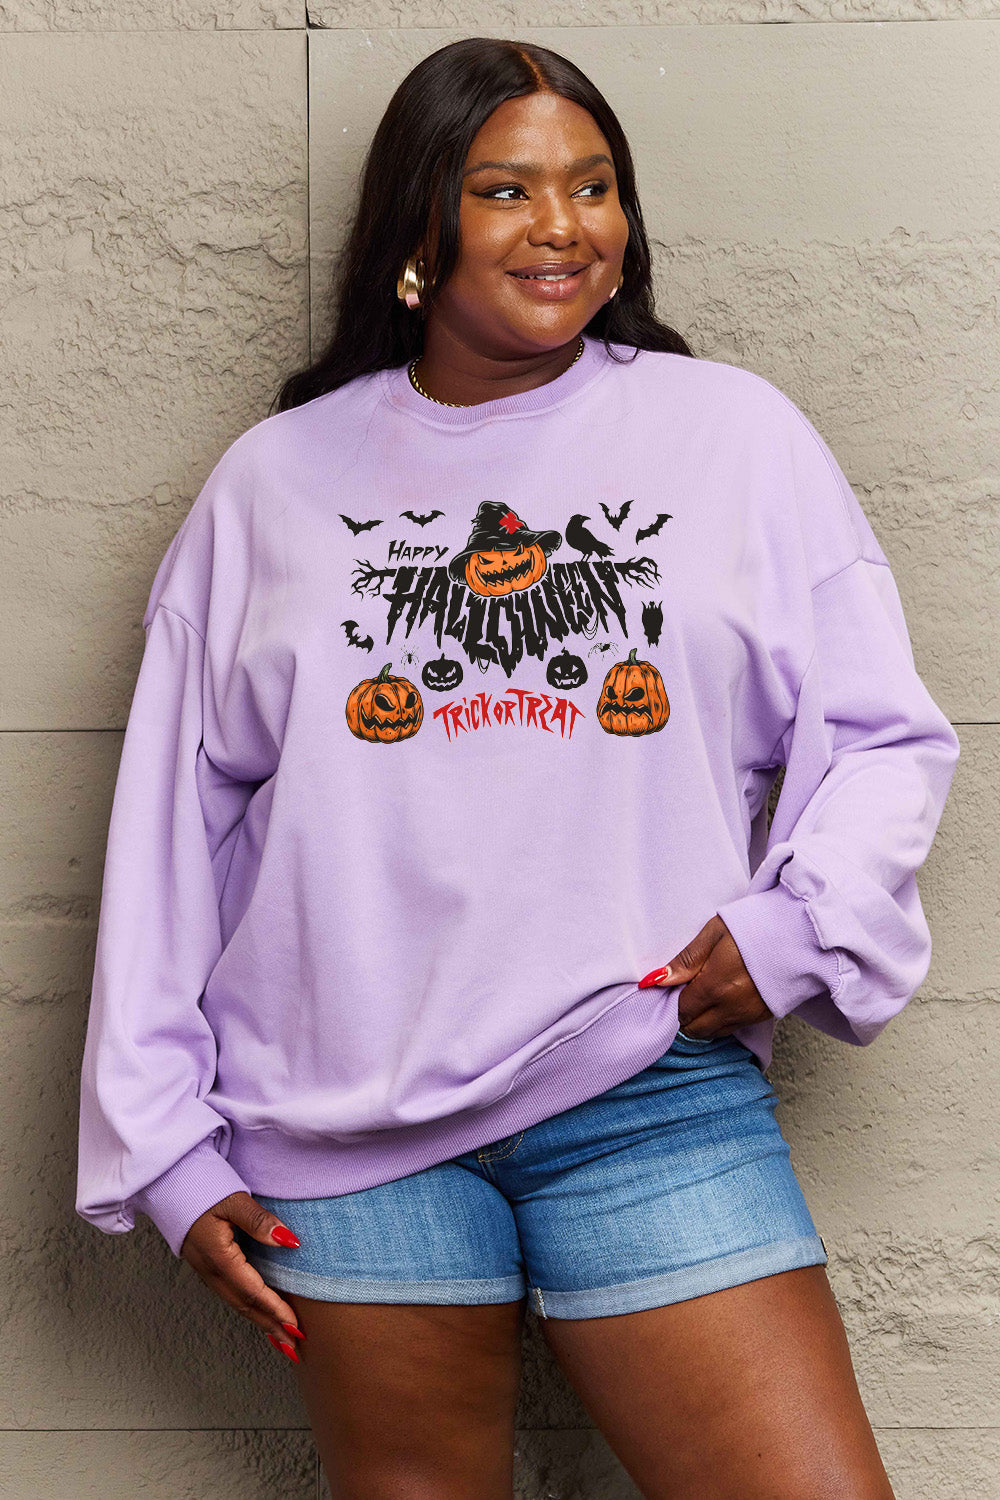 Simply Love Full Size HAPPY HALLOWEEN TRICK OR TREAT Graphic Sweatshirt BLUE ZONE PLANET